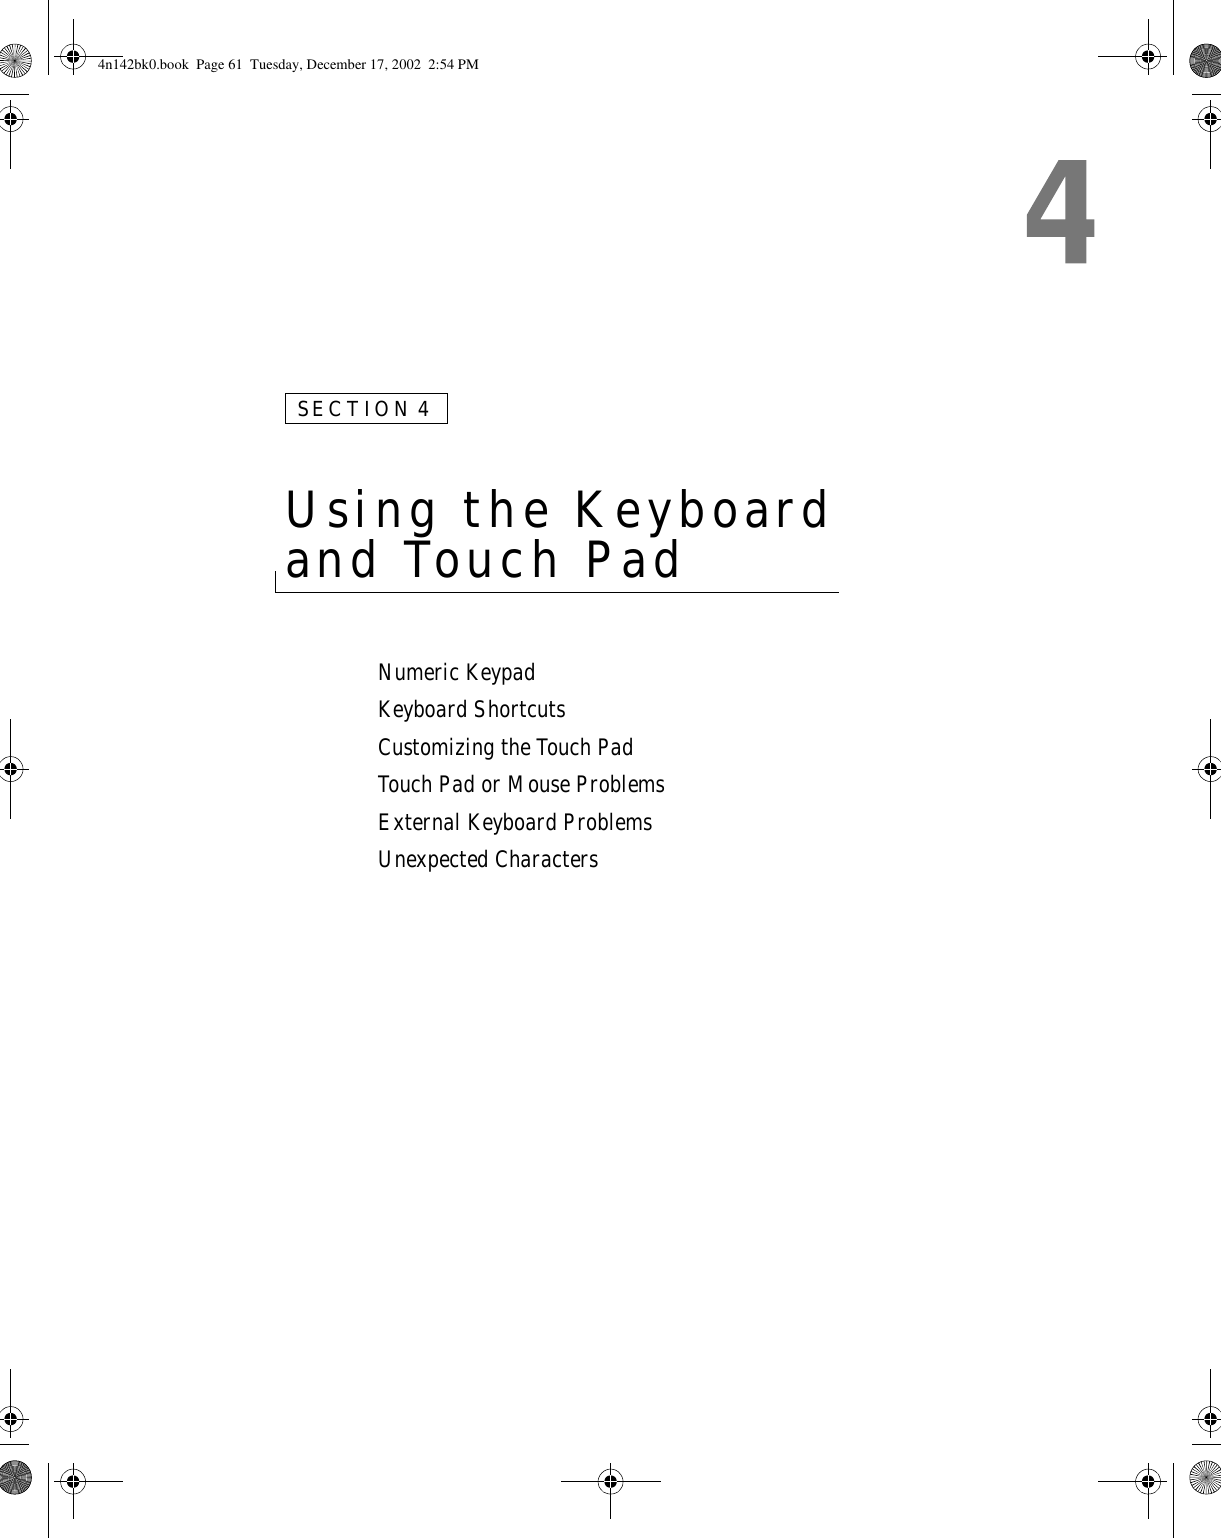 SECTION 4Using the Keyboard and Touch Pad Numeric KeypadKeyboard ShortcutsCustomizing the Touch PadTouch Pad or Mouse ProblemsExternal Keyboard ProblemsUnexpected Characters4n142bk0.book  Page 61  Tuesday, December 17, 2002  2:54 PM